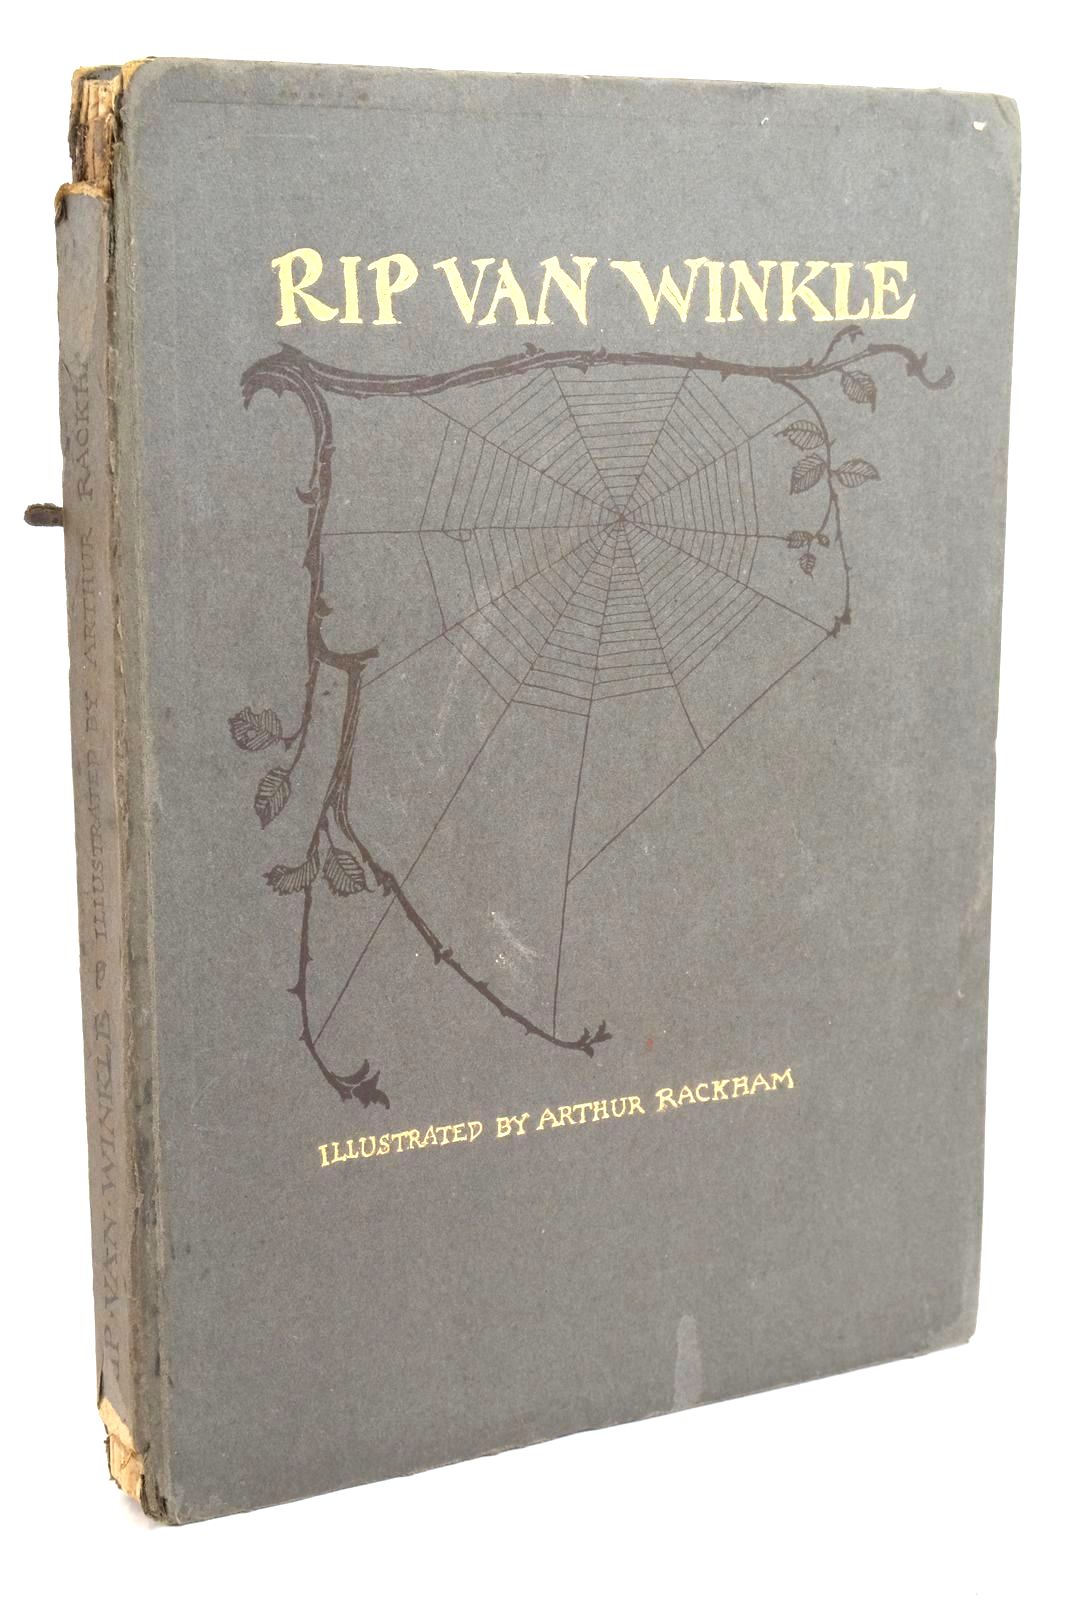 Photo of RIP VAN WINKLE written by Irving, Washington illustrated by Rackham, Arthur published by William Heinemann Ltd. (STOCK CODE: 1322153)  for sale by Stella & Rose's Books